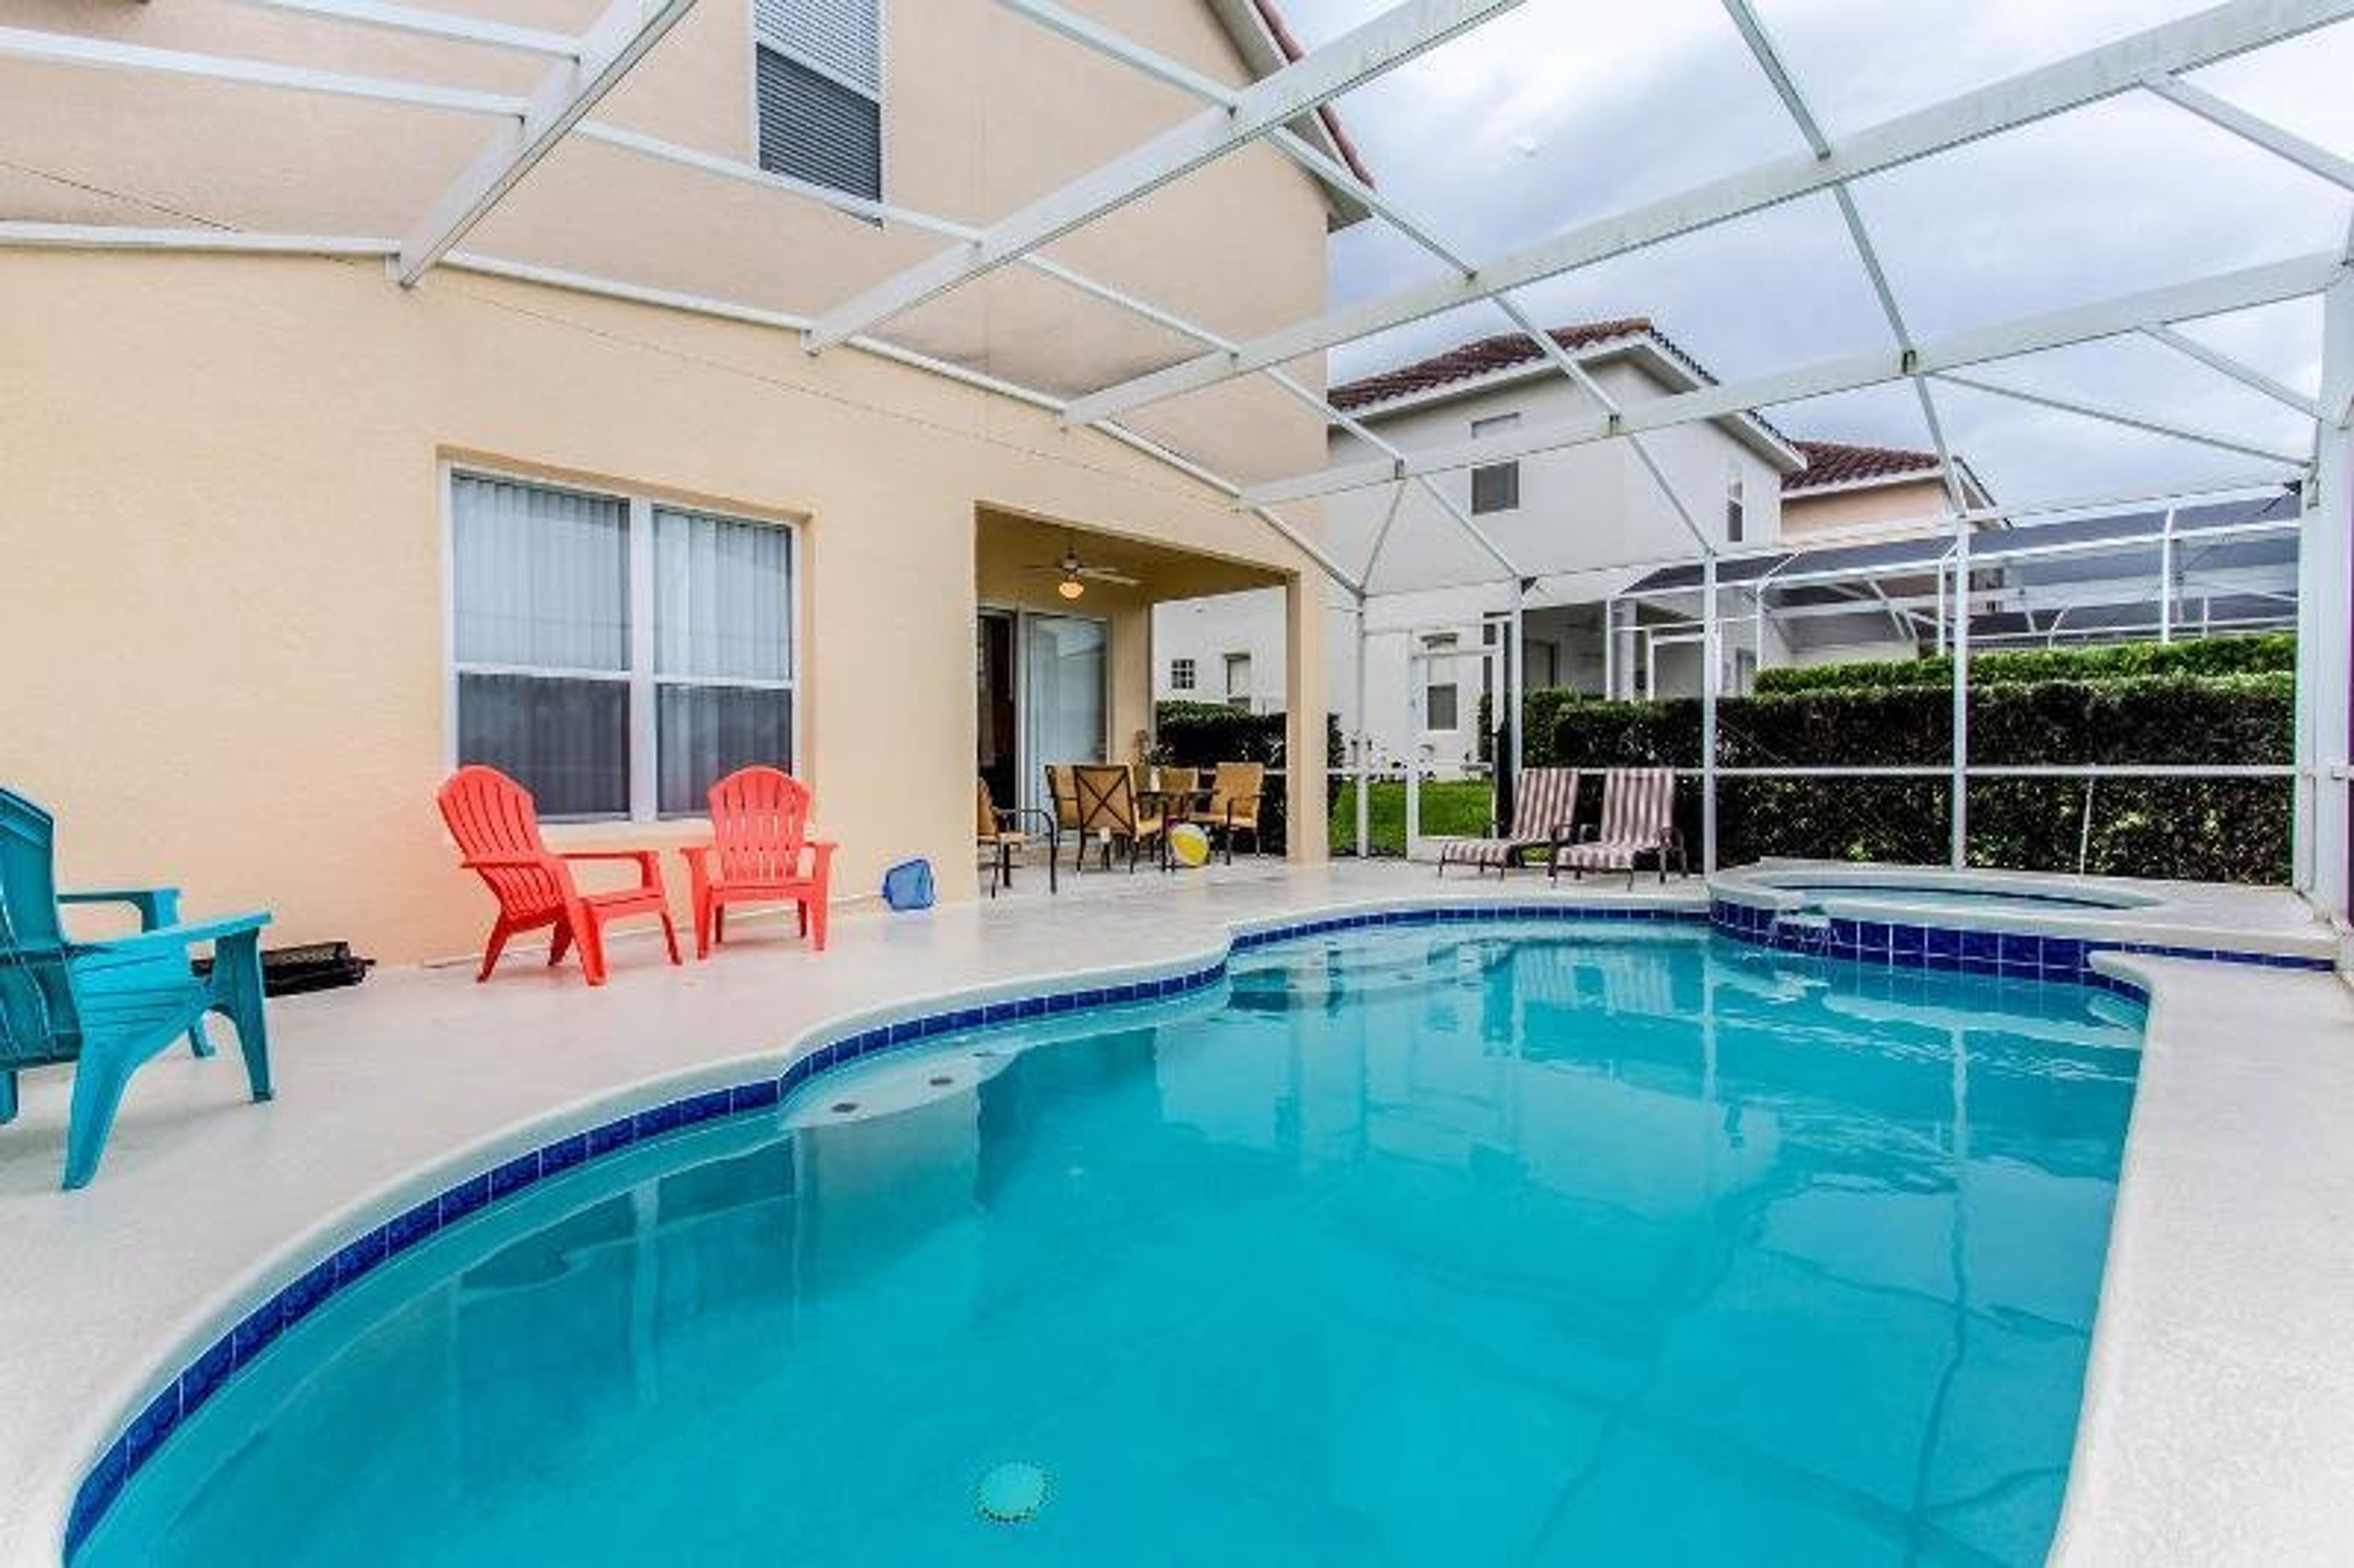 We have a large pool and patio area, and you are not overlooked.